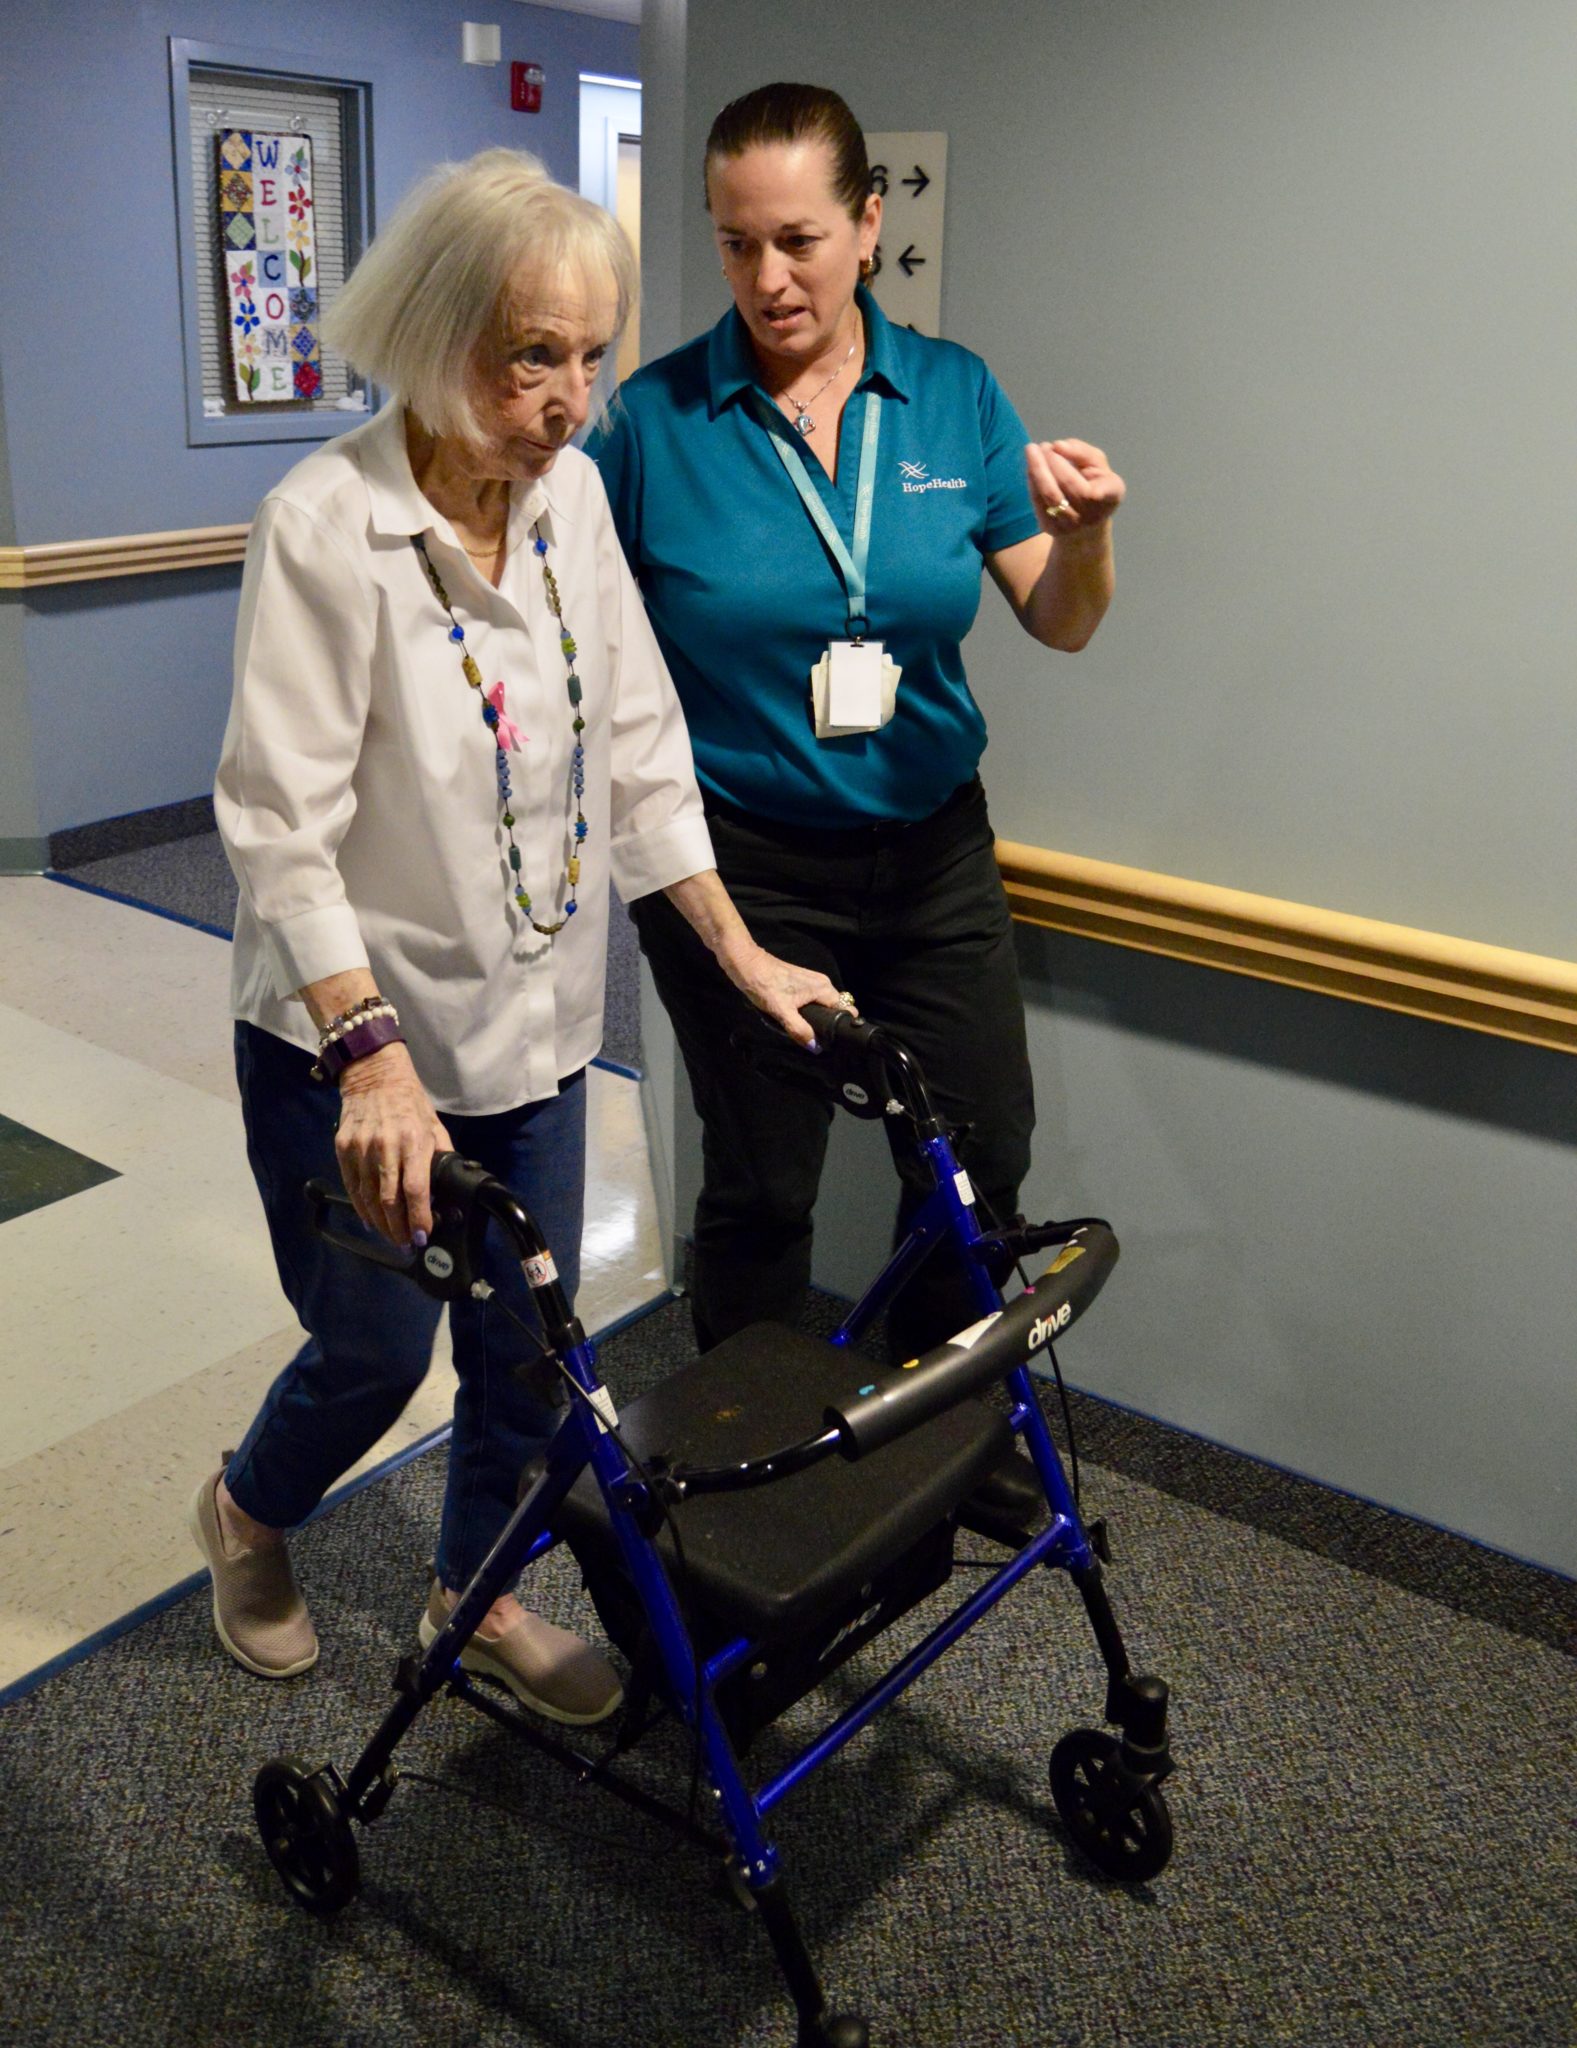 Elderly woman pushing a walker while a young female physical therapist guides her through the hallway